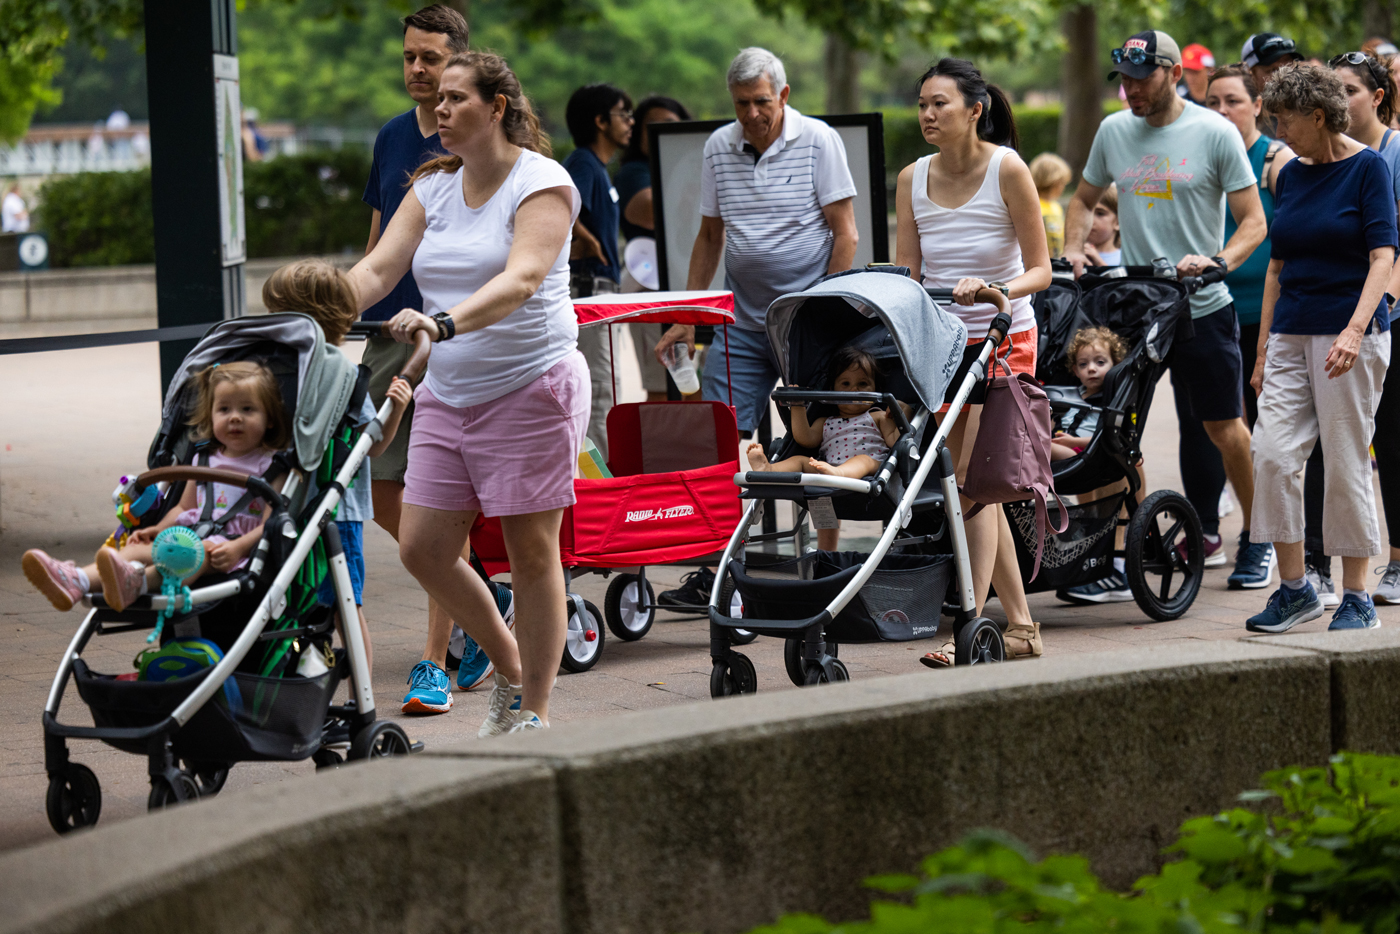 Families push strollers in the park